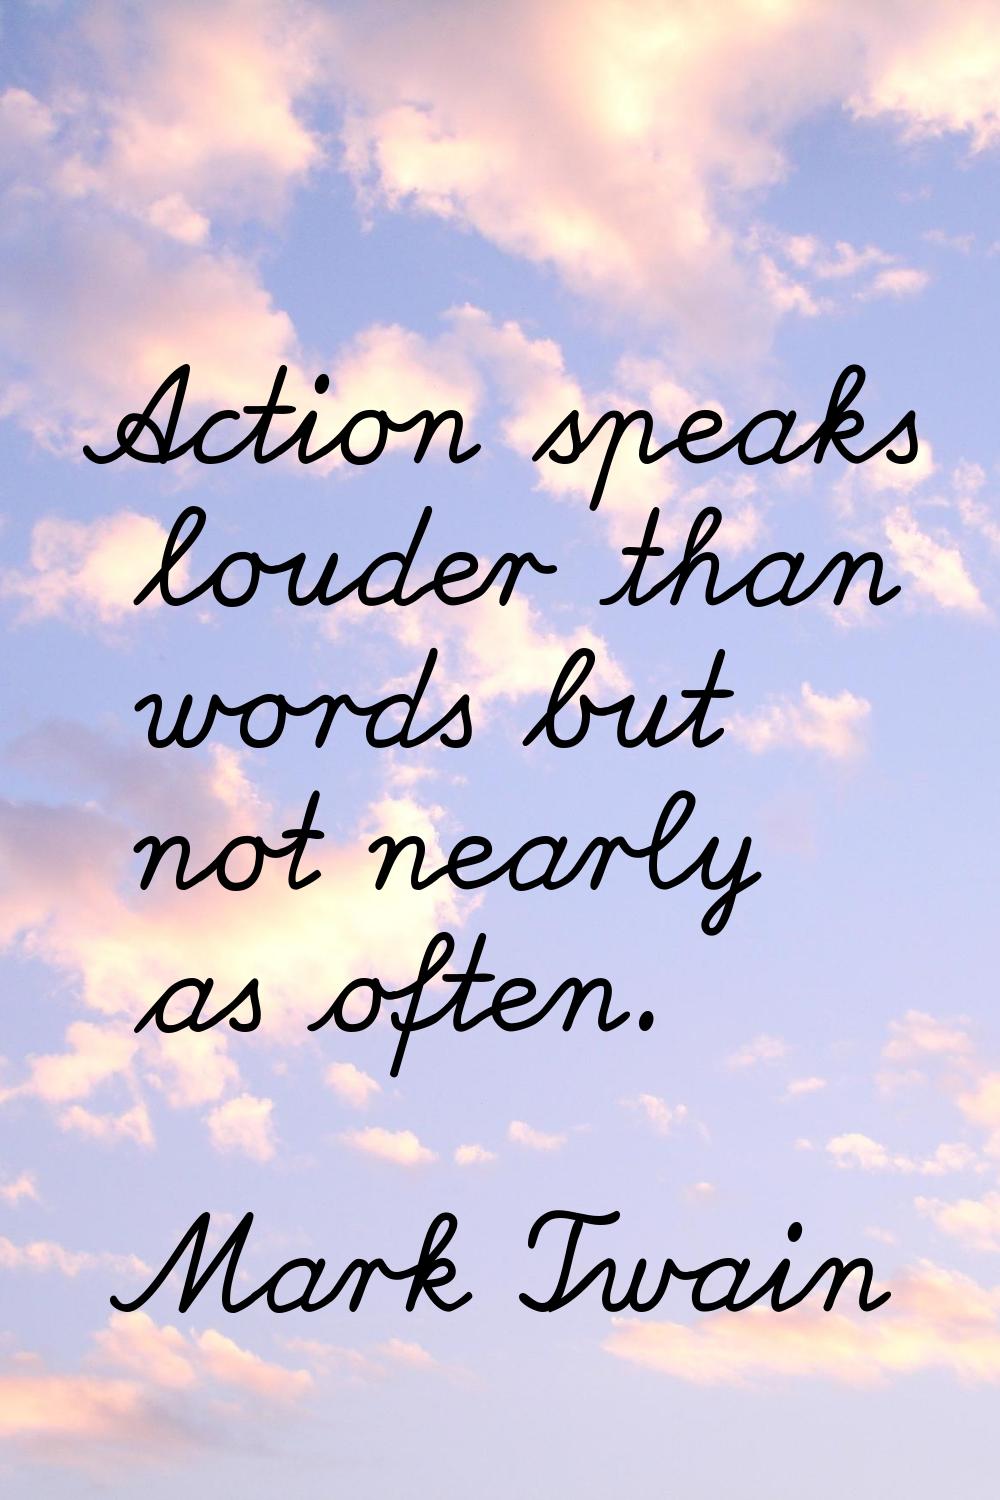 Action speaks louder than words but not nearly as often.